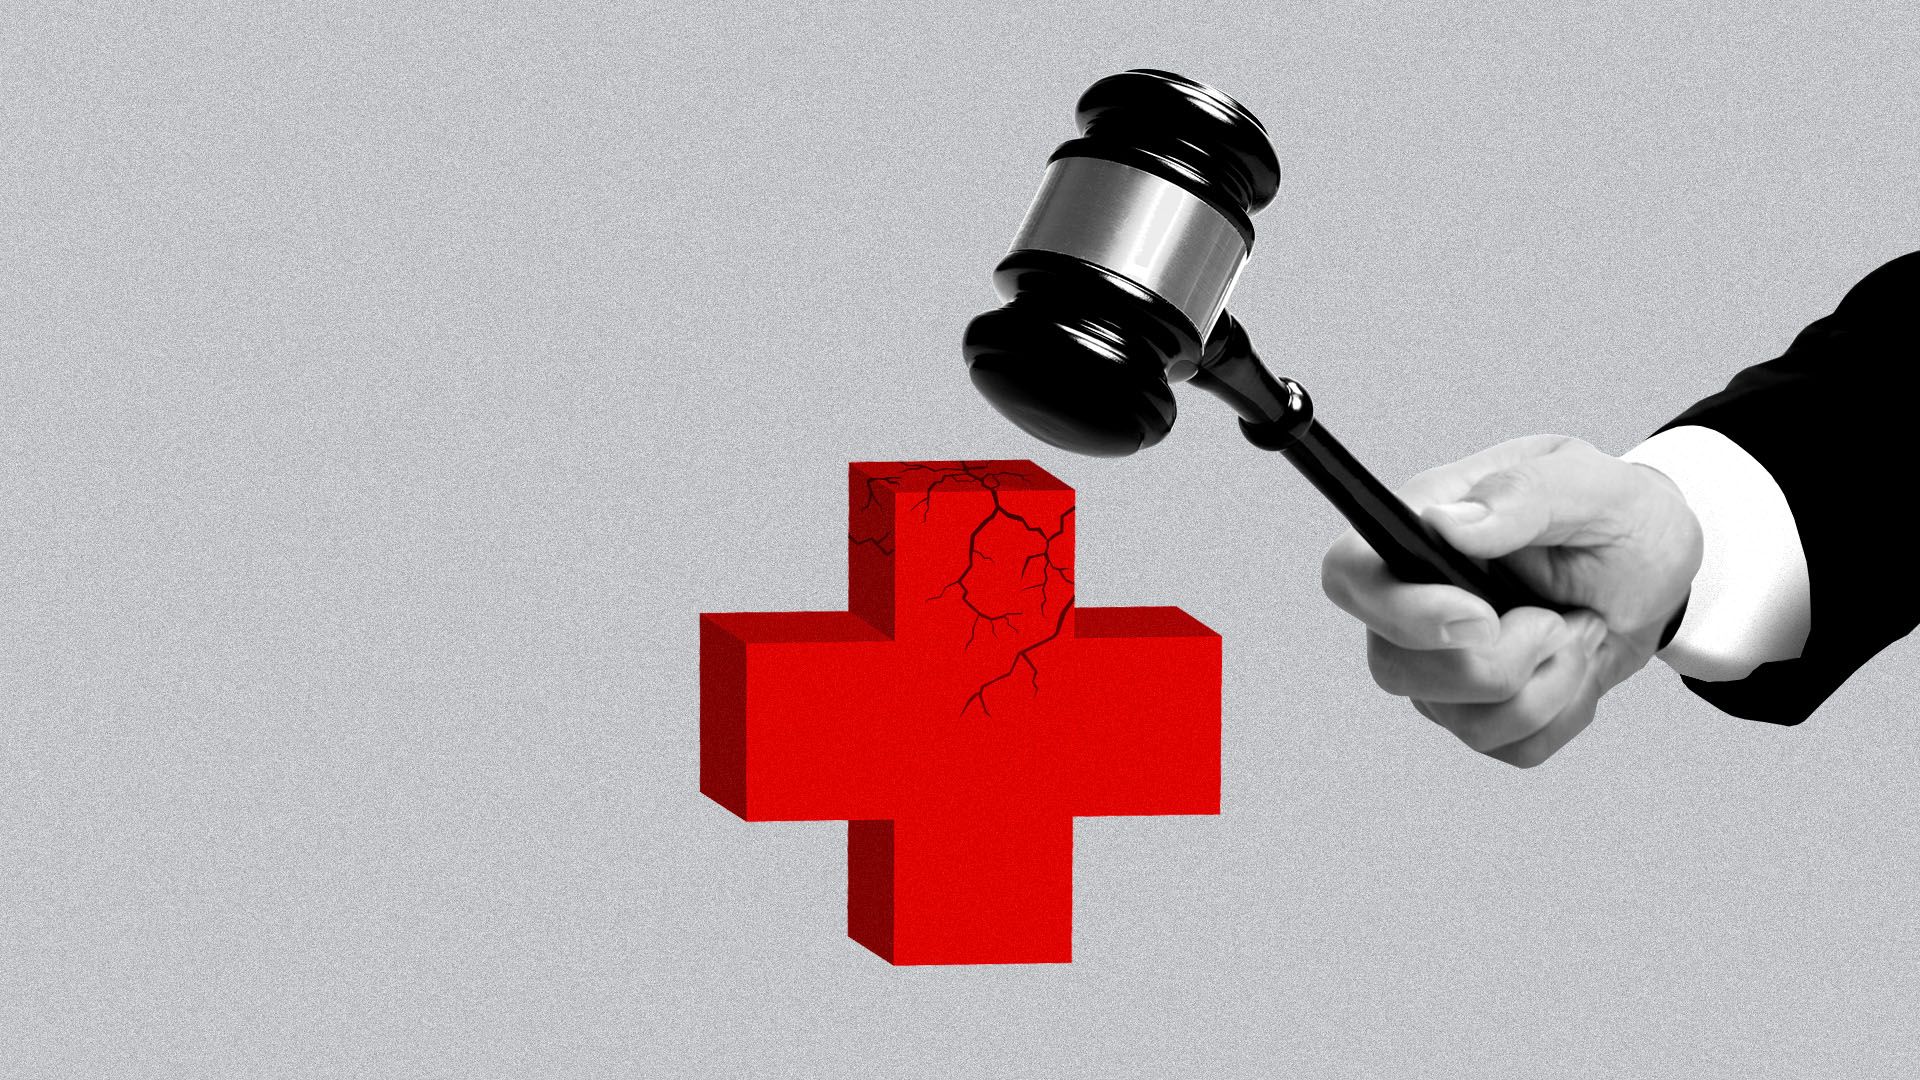  Illustration of hand with gavel breaking a red cross symbol